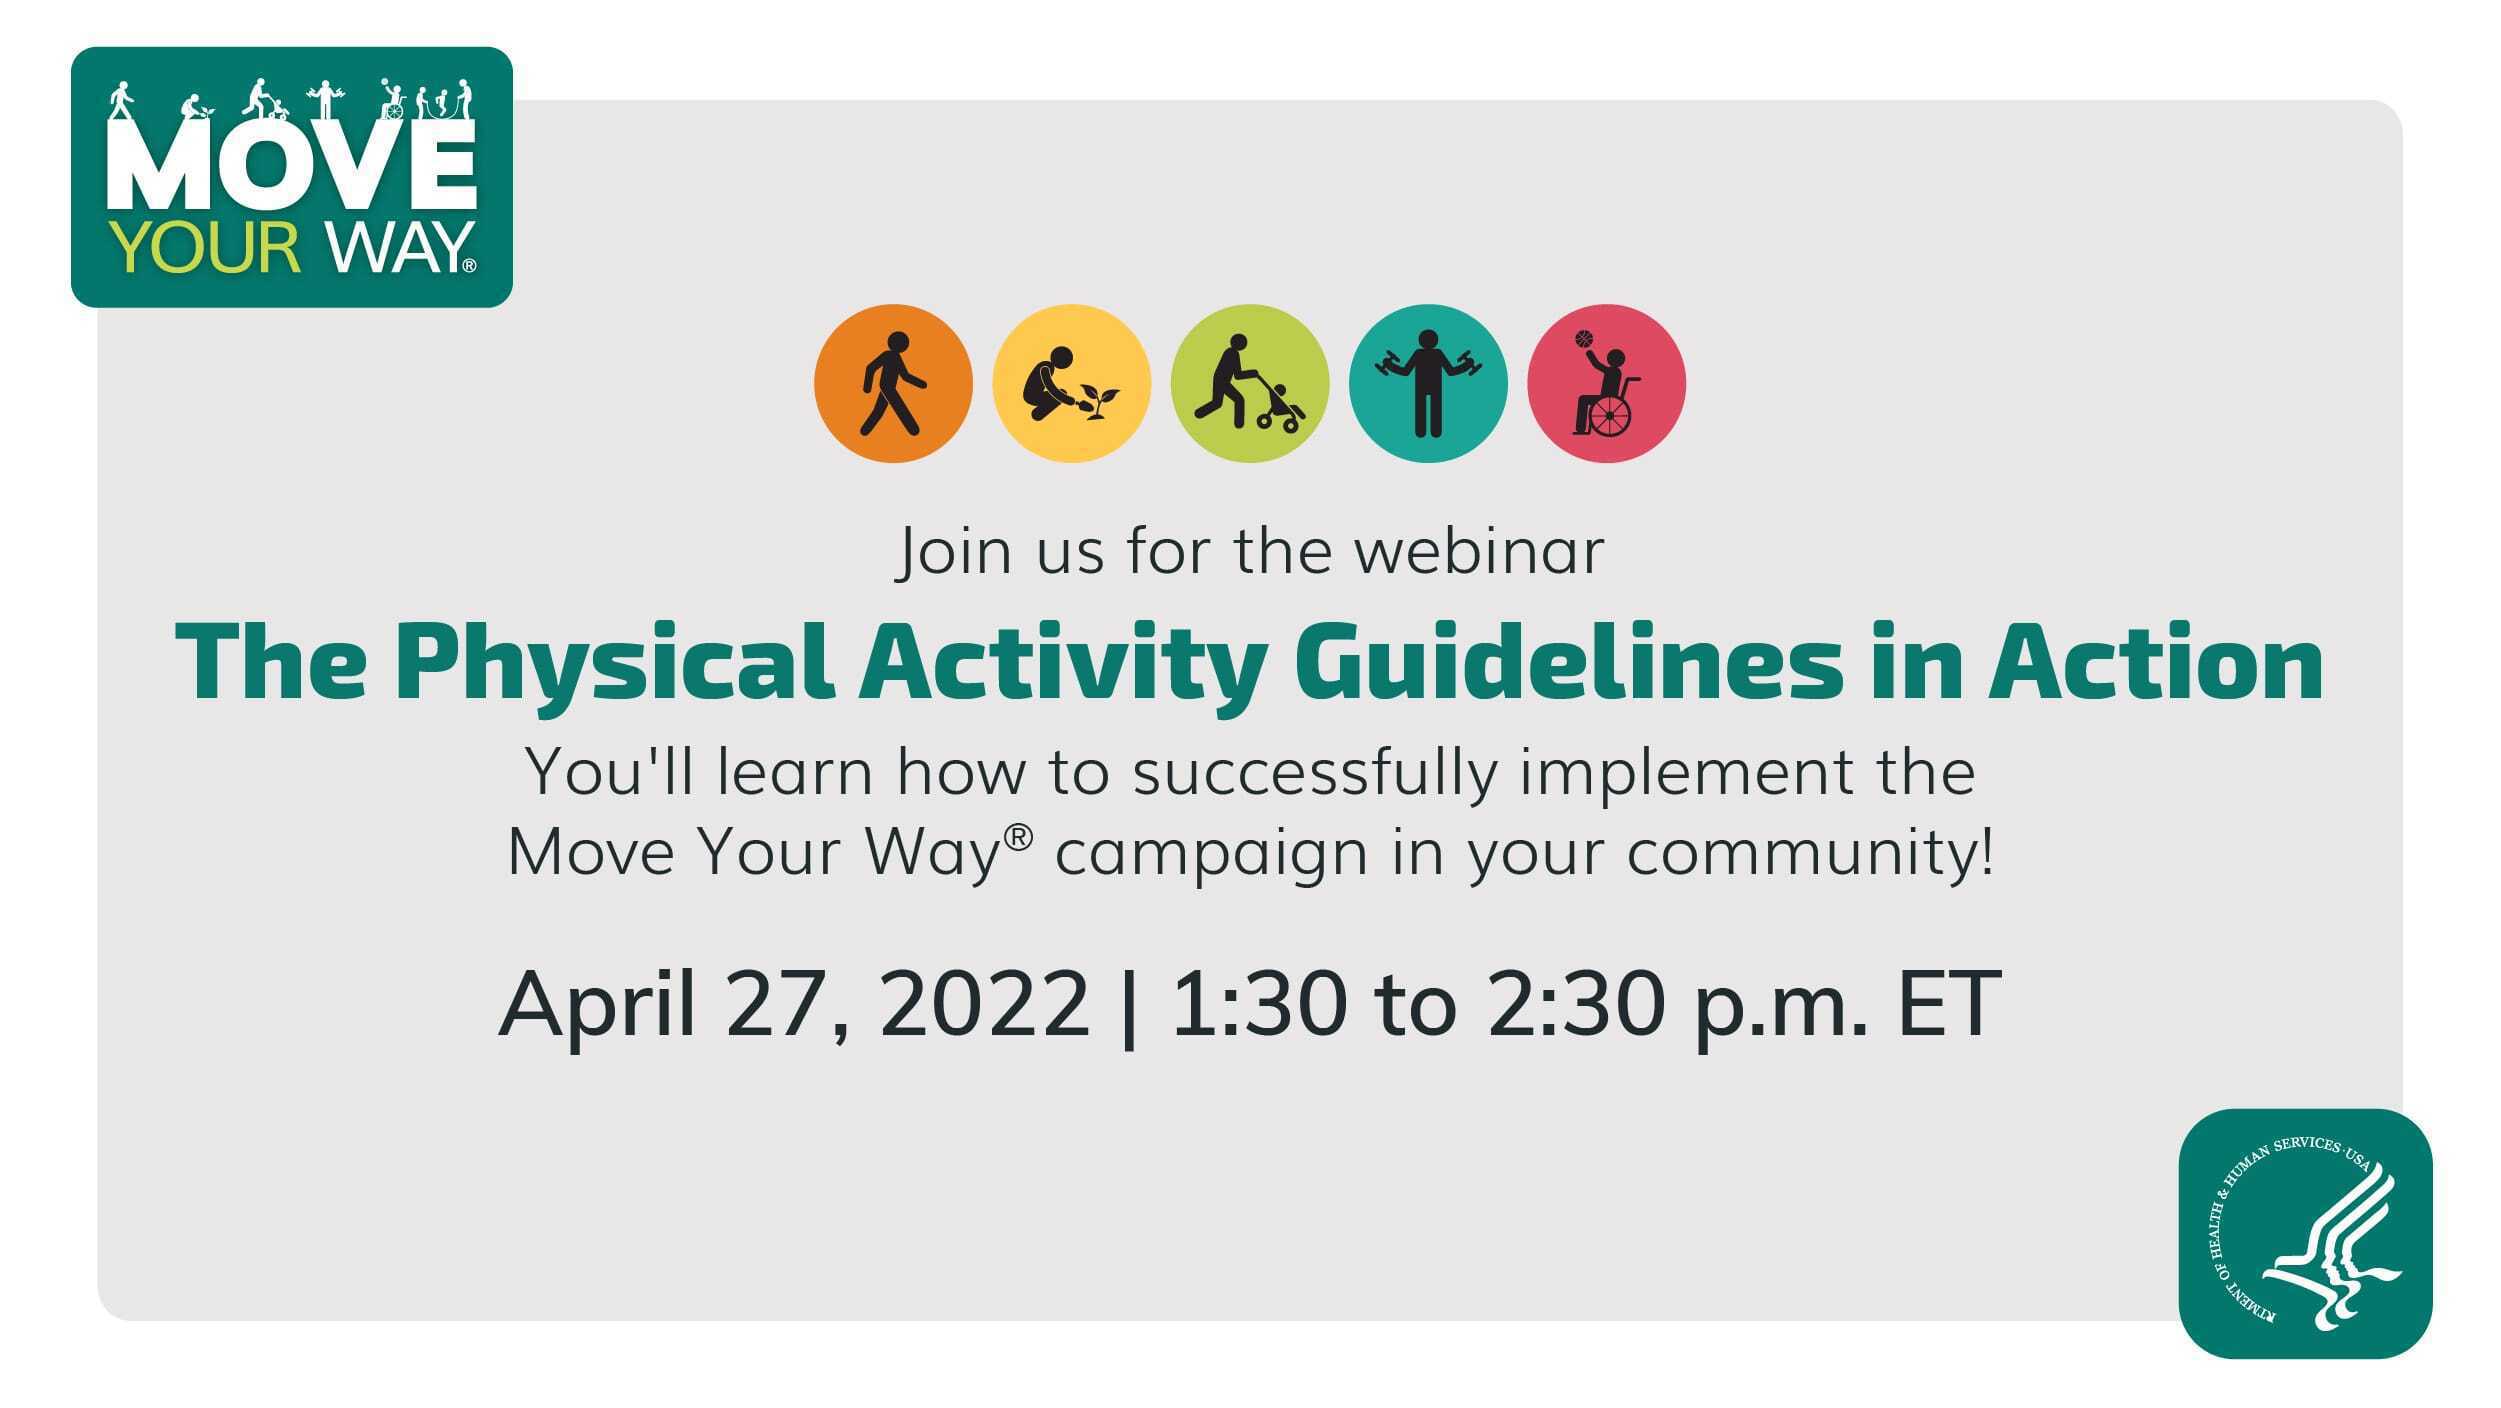 Join the The Physical Activity Guidelines in Action webinar on 4/27/22 from 1:30-2:30pm ET to learn how to implement the MYW campaign in your community